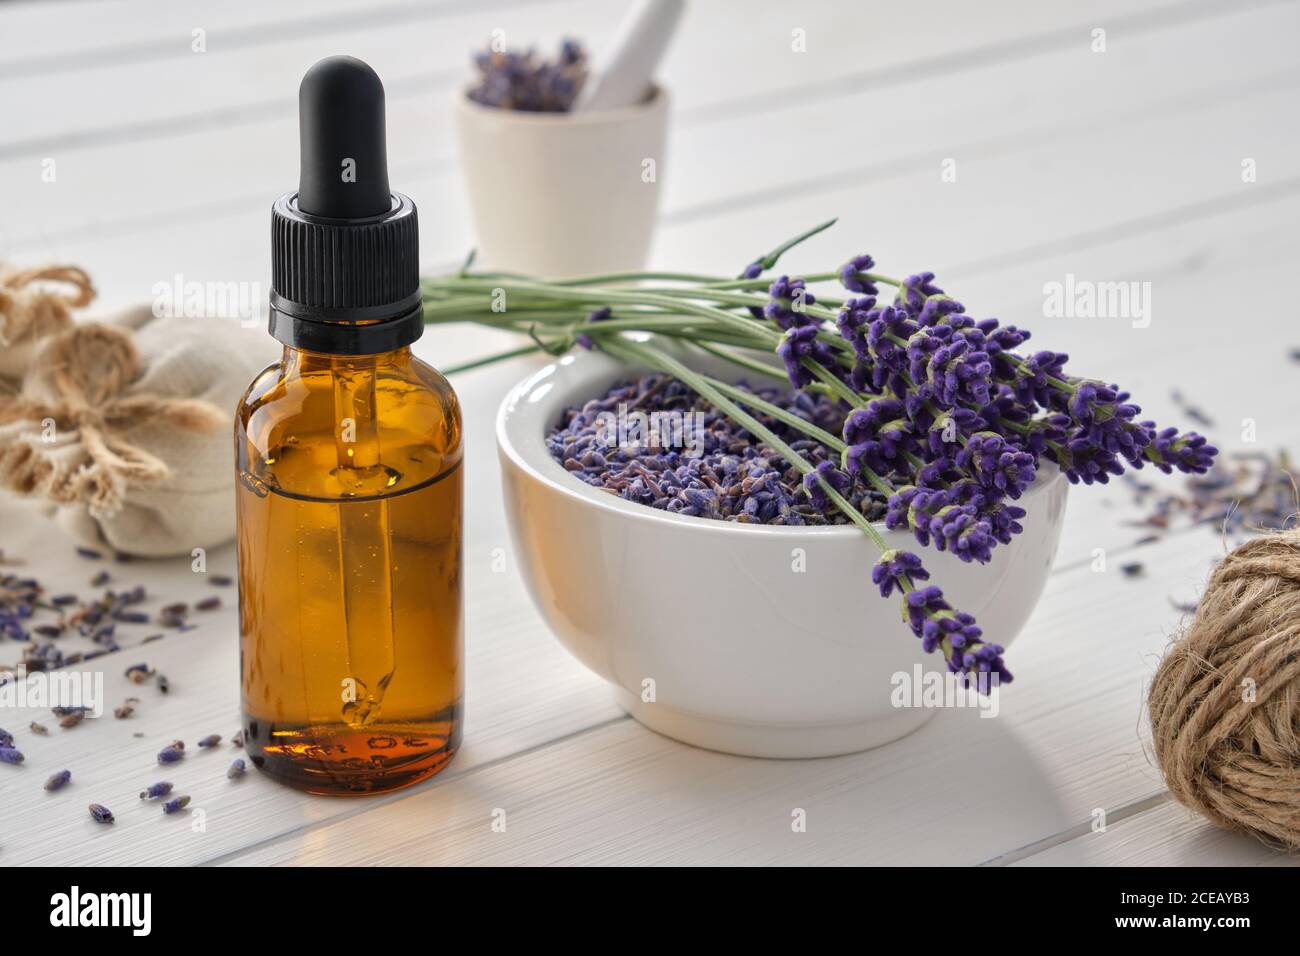 Dropper bottle of essential lavender oil, mortar of dry lavender flowers and sachets on white wooden table. Stock Photo